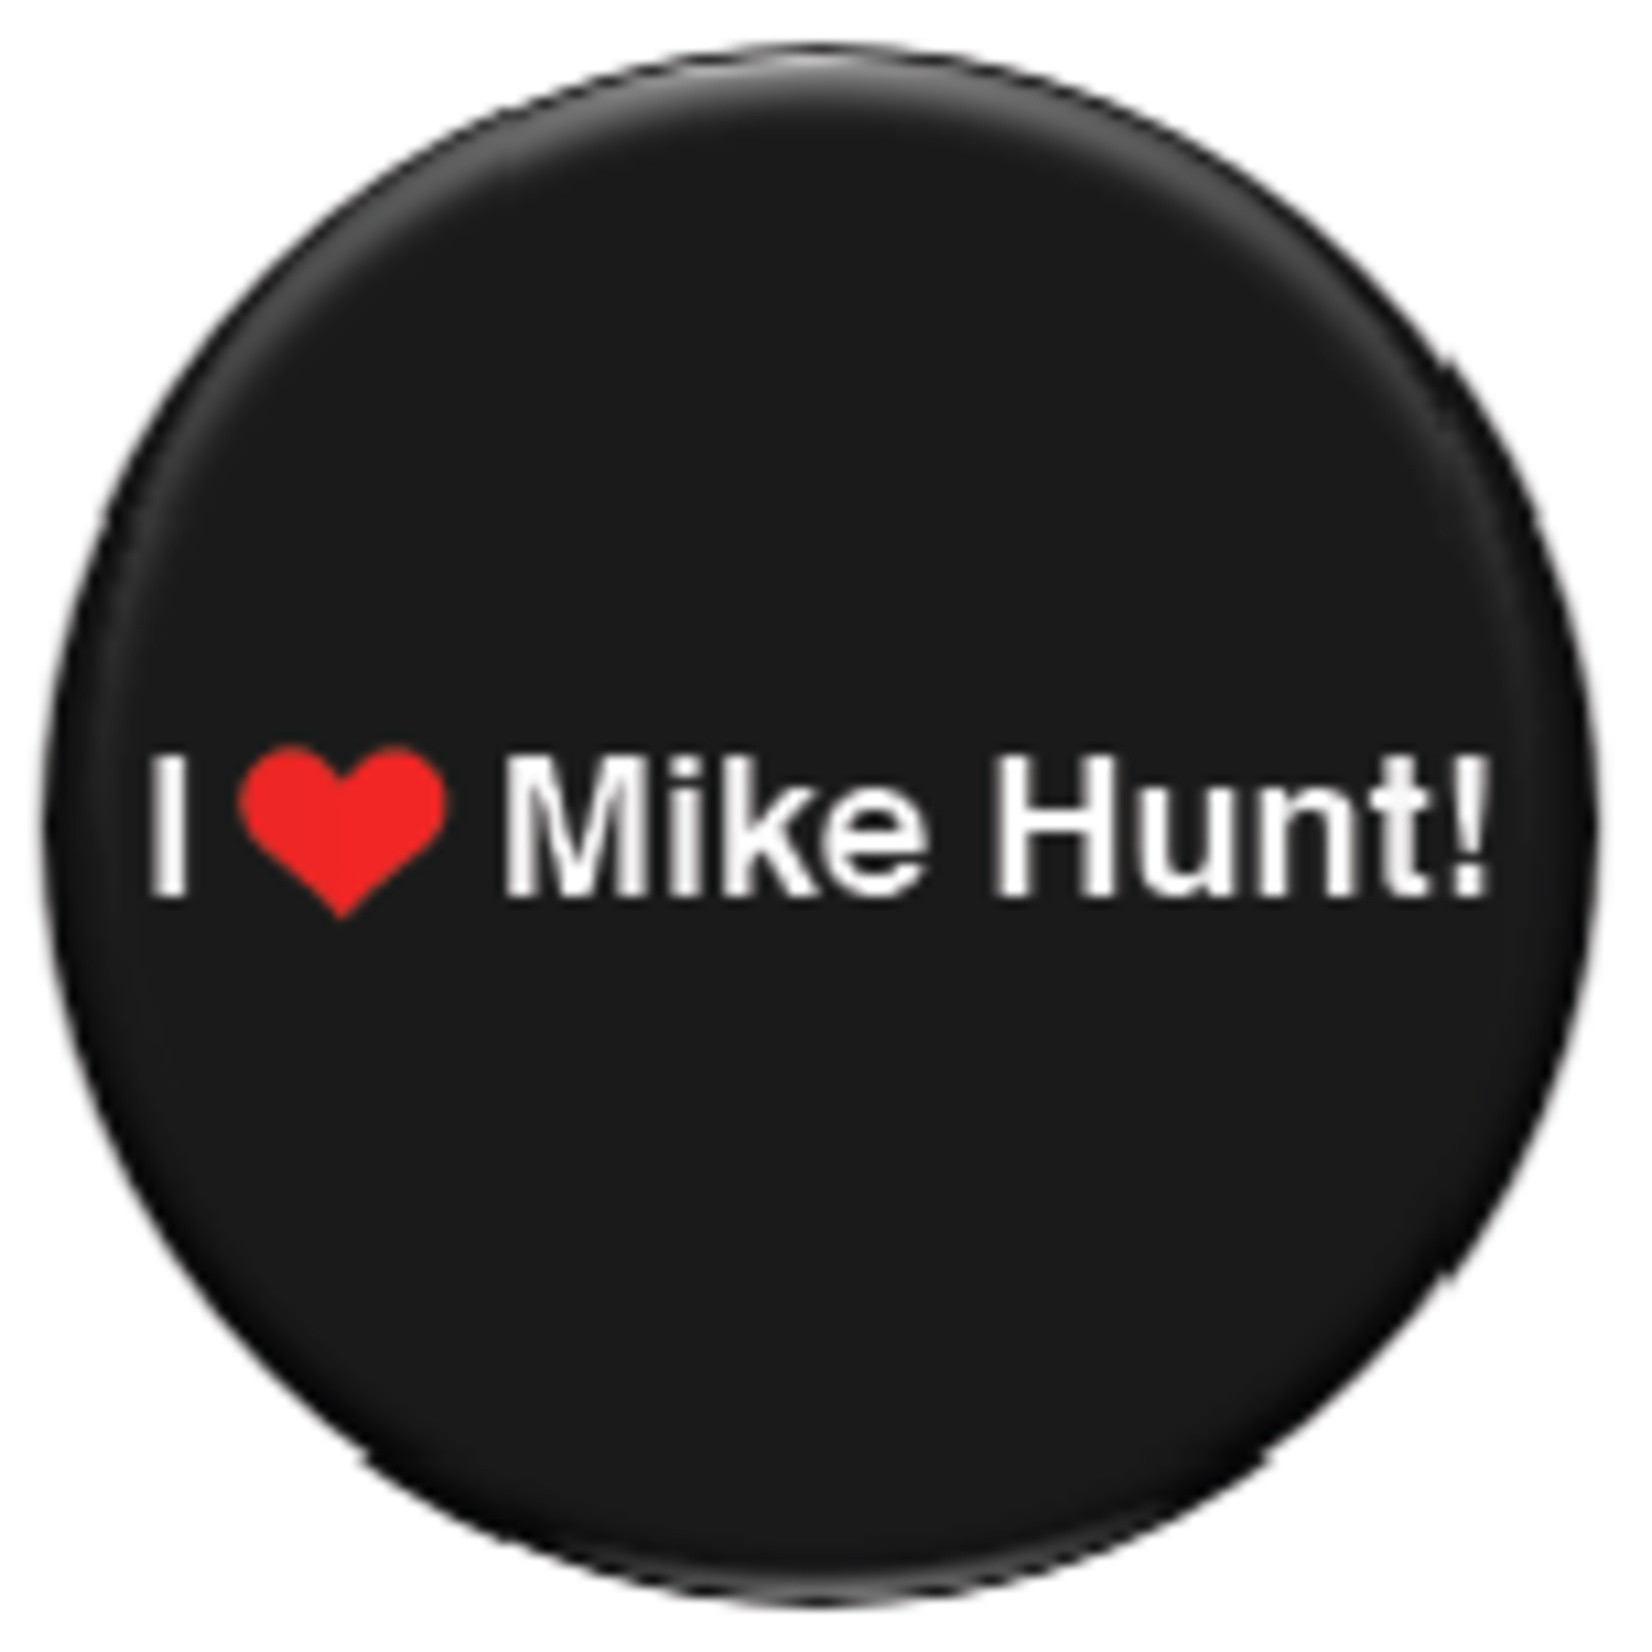 Button - I Heart Mike Hunt!